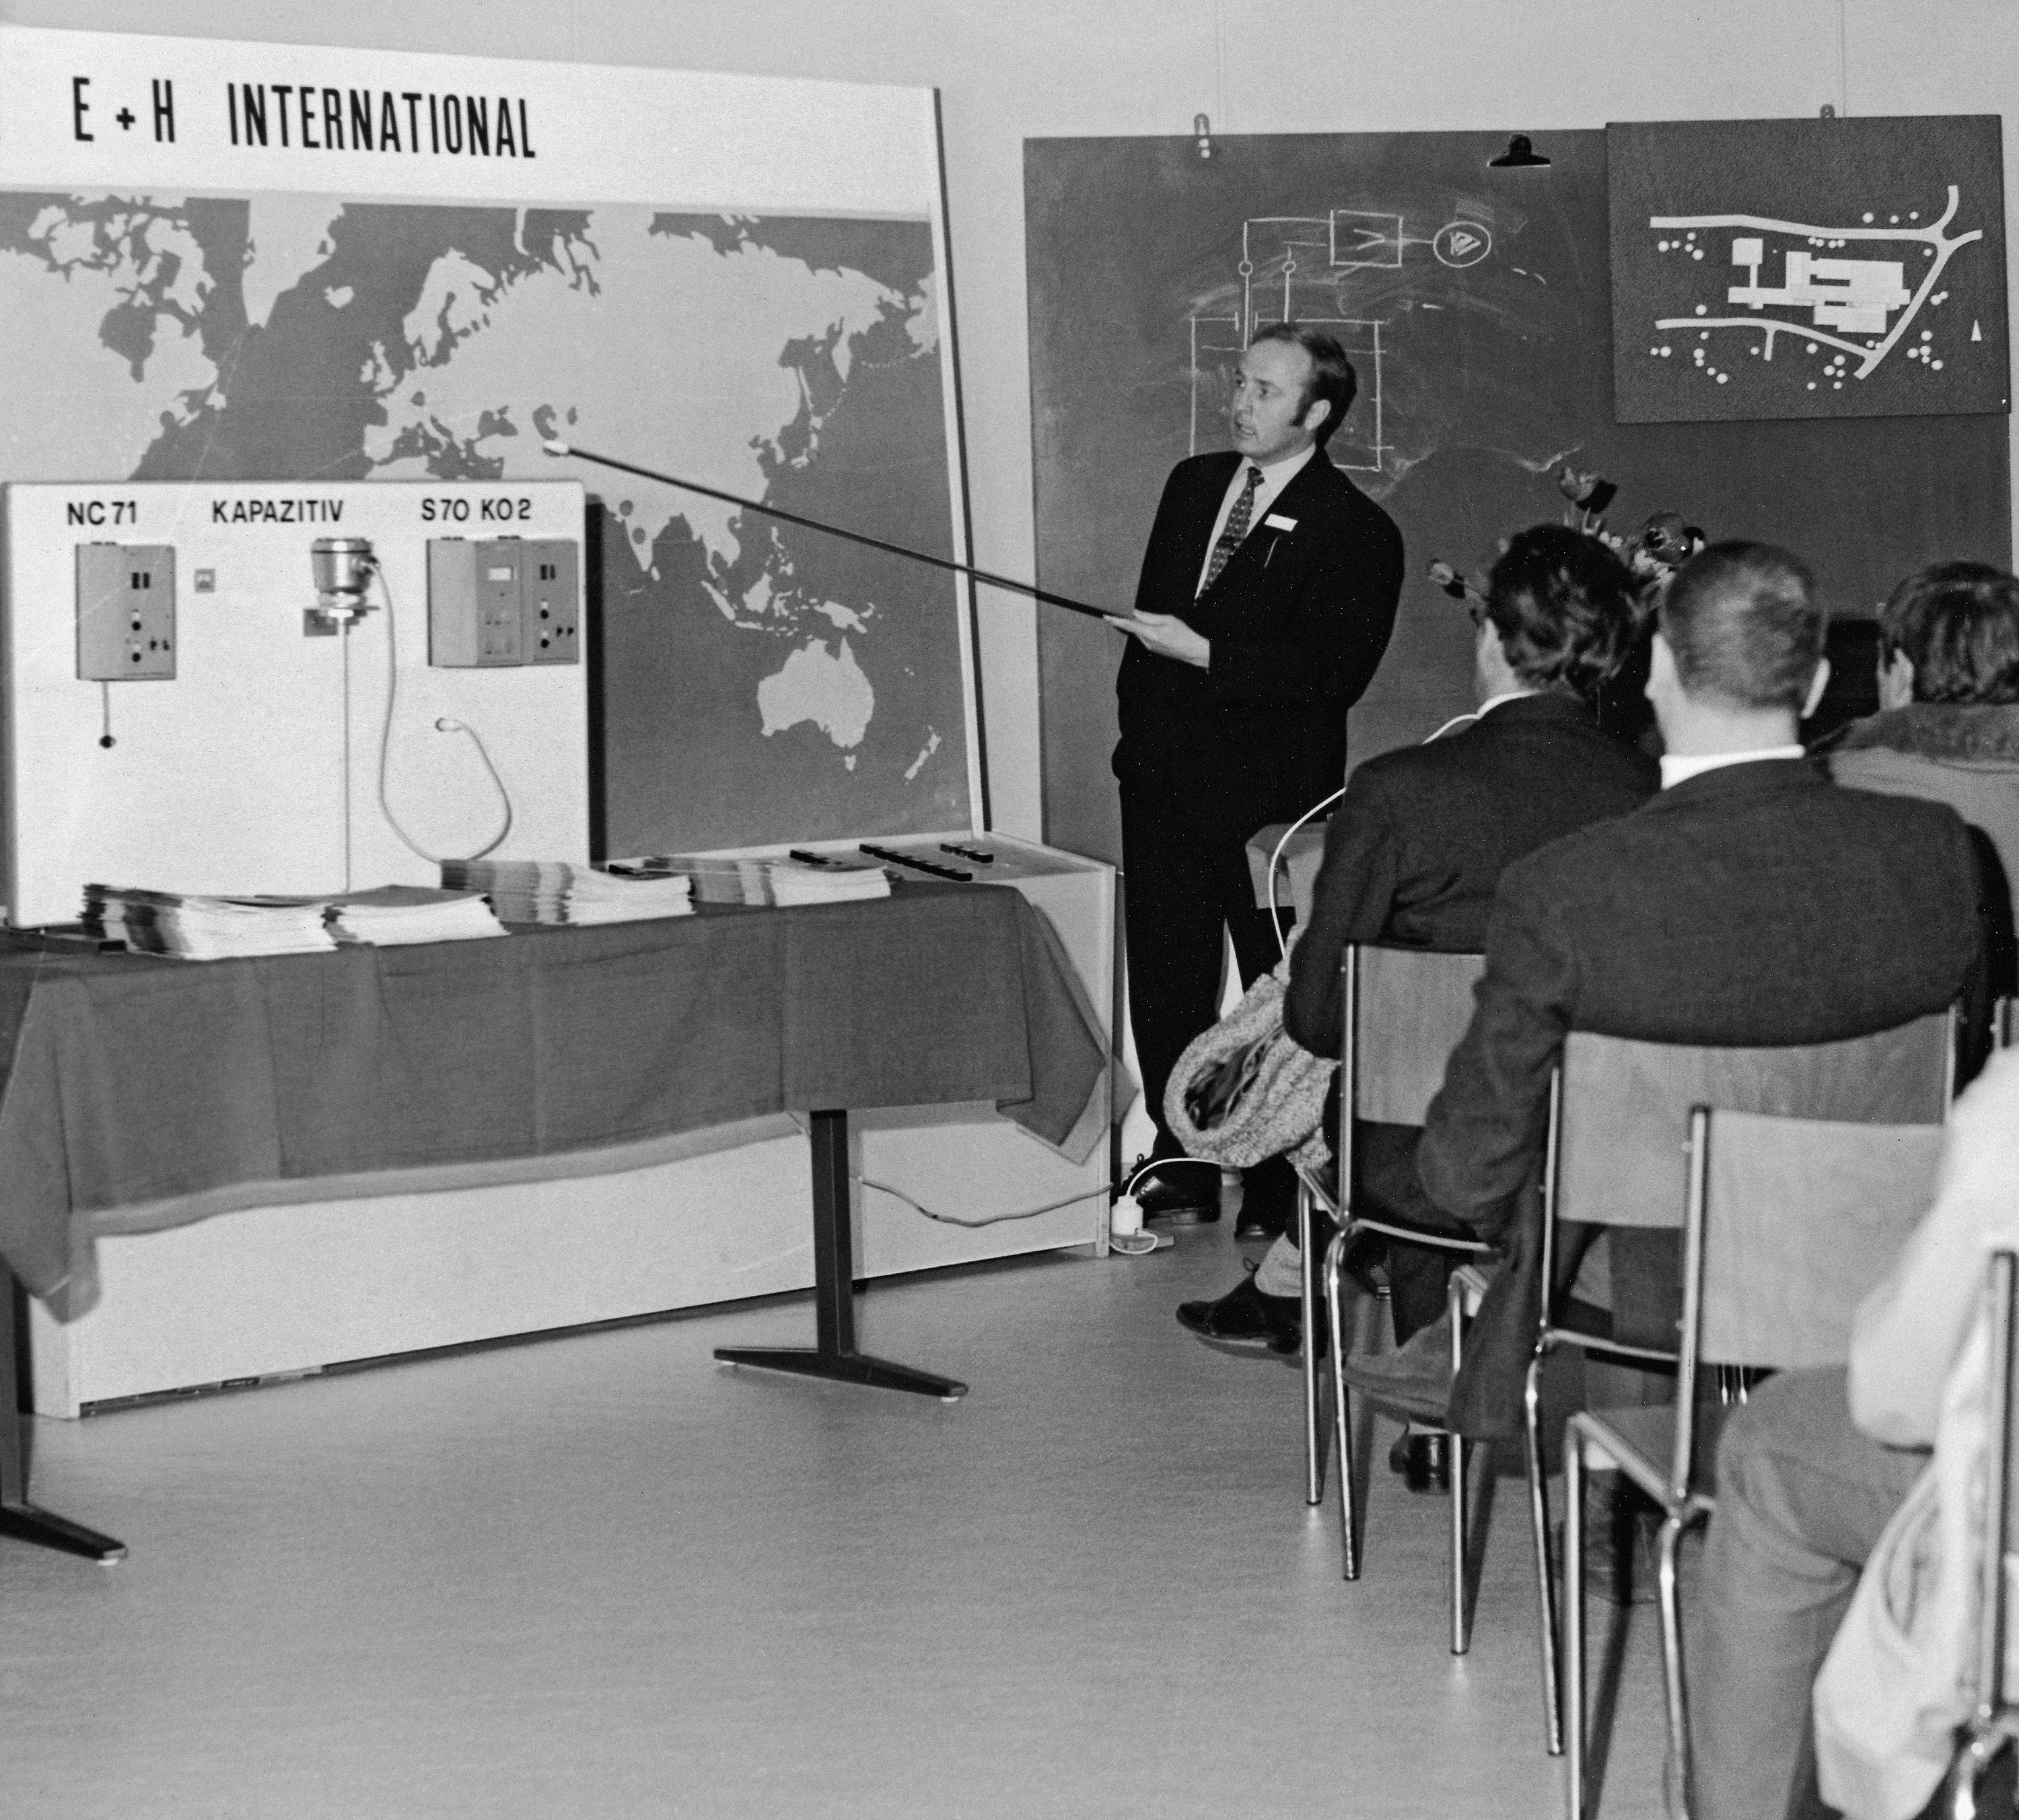 Endress+Hauser opened up foreign markets from 1960, including overseas from 1970.